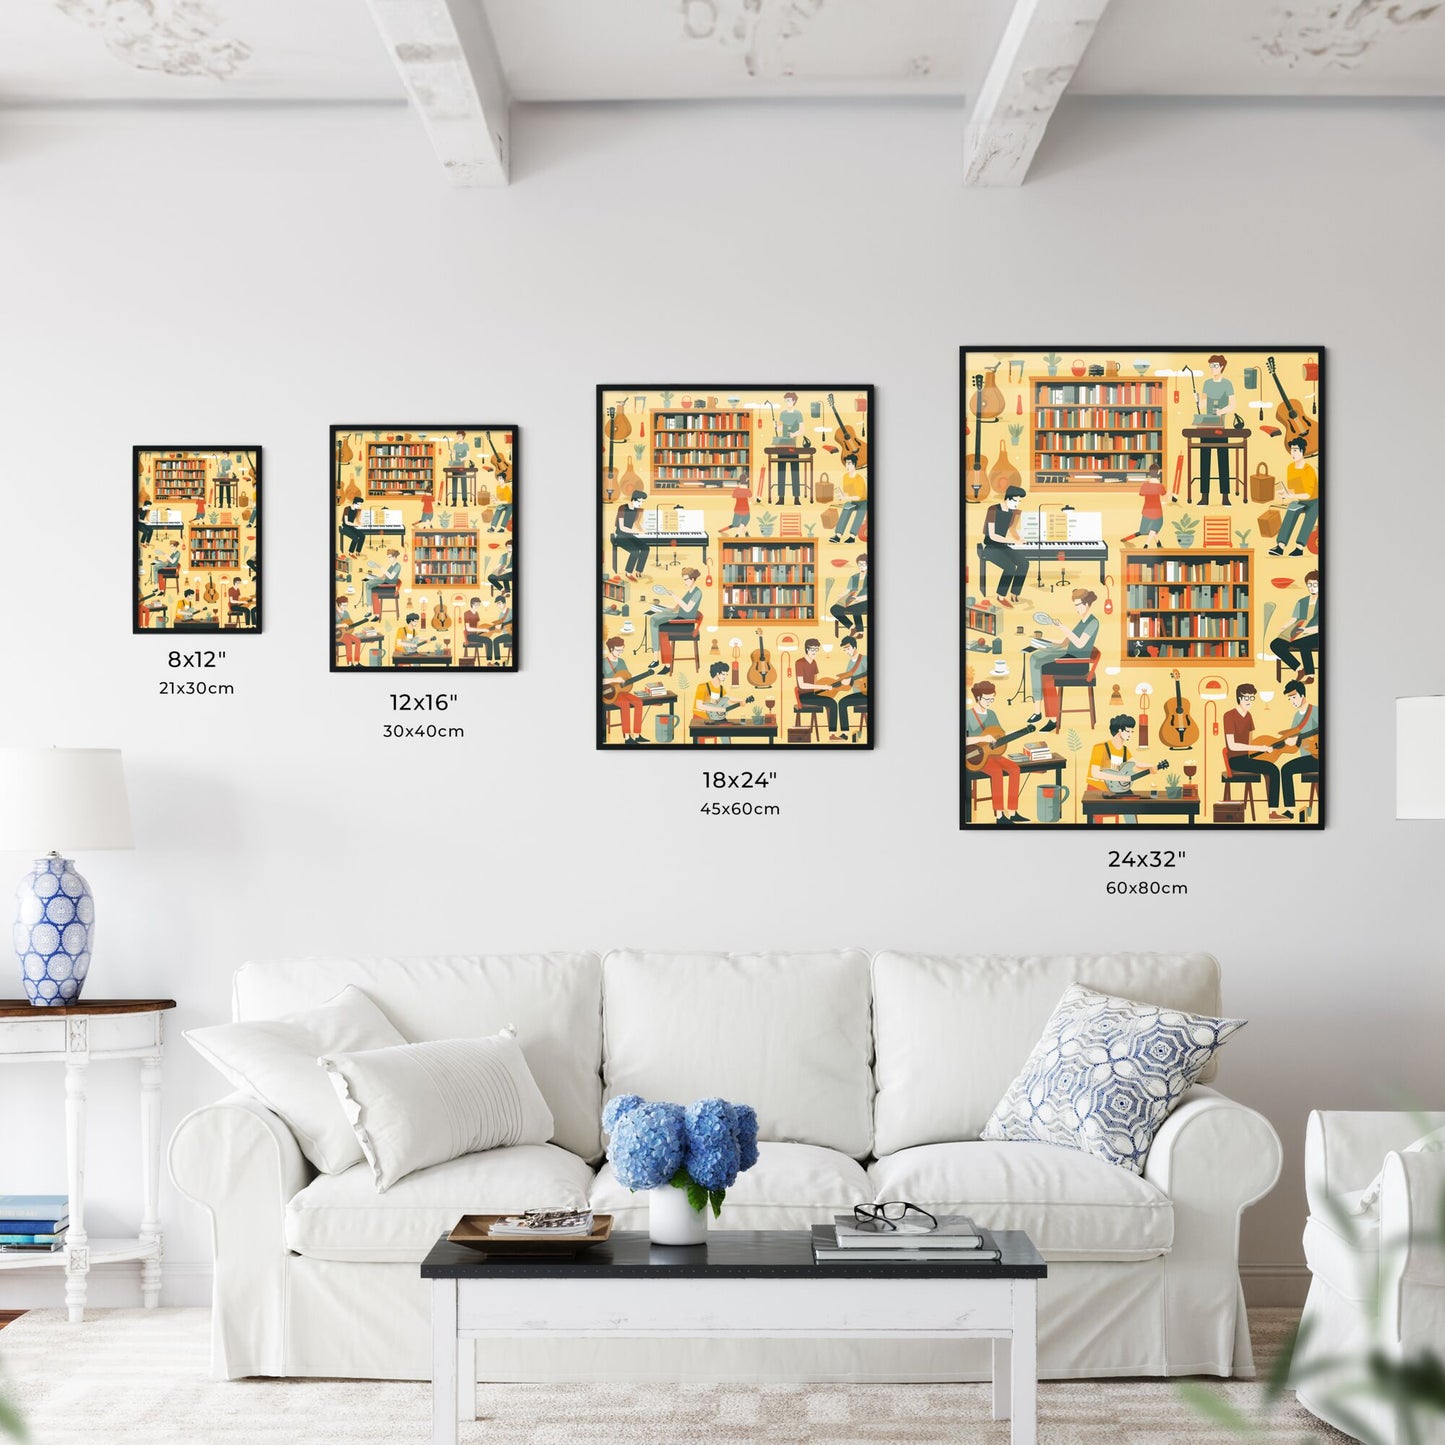 Travelling hobby poster, simple, layout, airportcore - Art print of a collage of people playing music Default Title